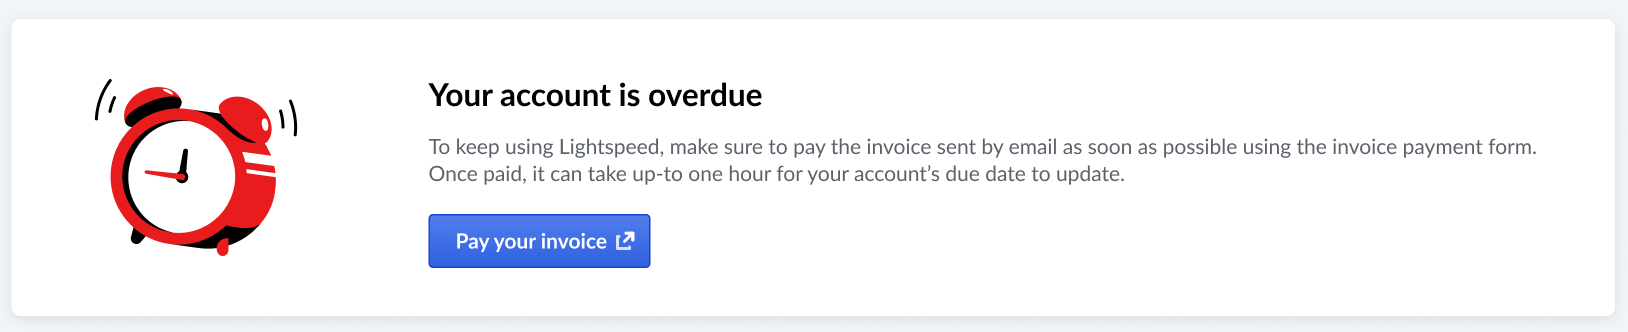 Example of the banner indicating your invoice is overdue.